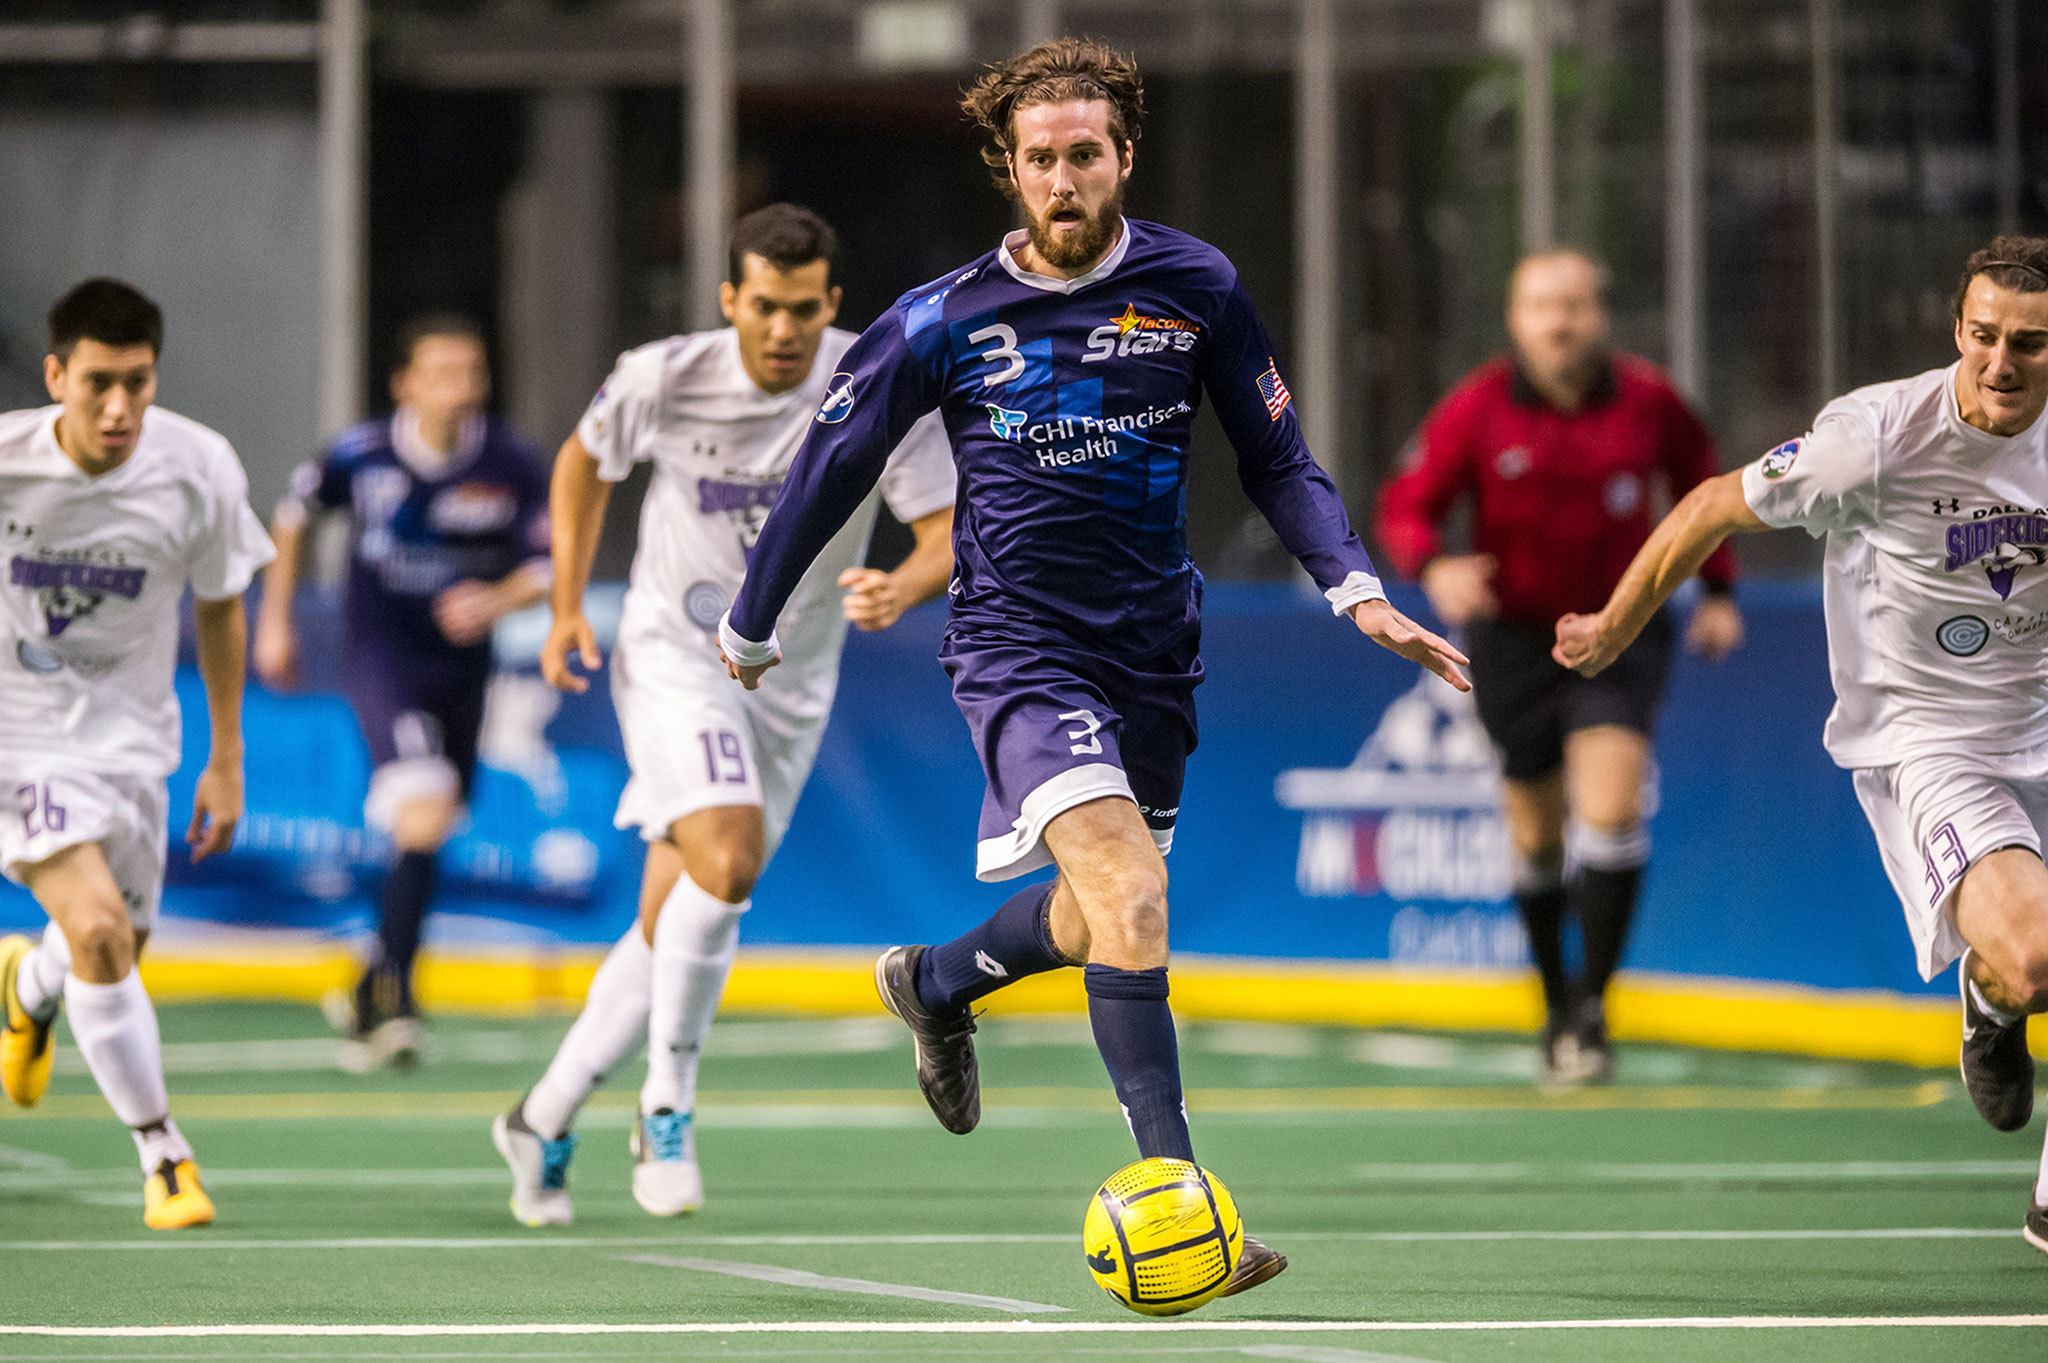 Cory Keitz led a stout defensive effort in the Stars’ weekend sweep of Dallas and St. Louis. COURTESY PHOTO, Wilson Tsoi/Tacoma Stars